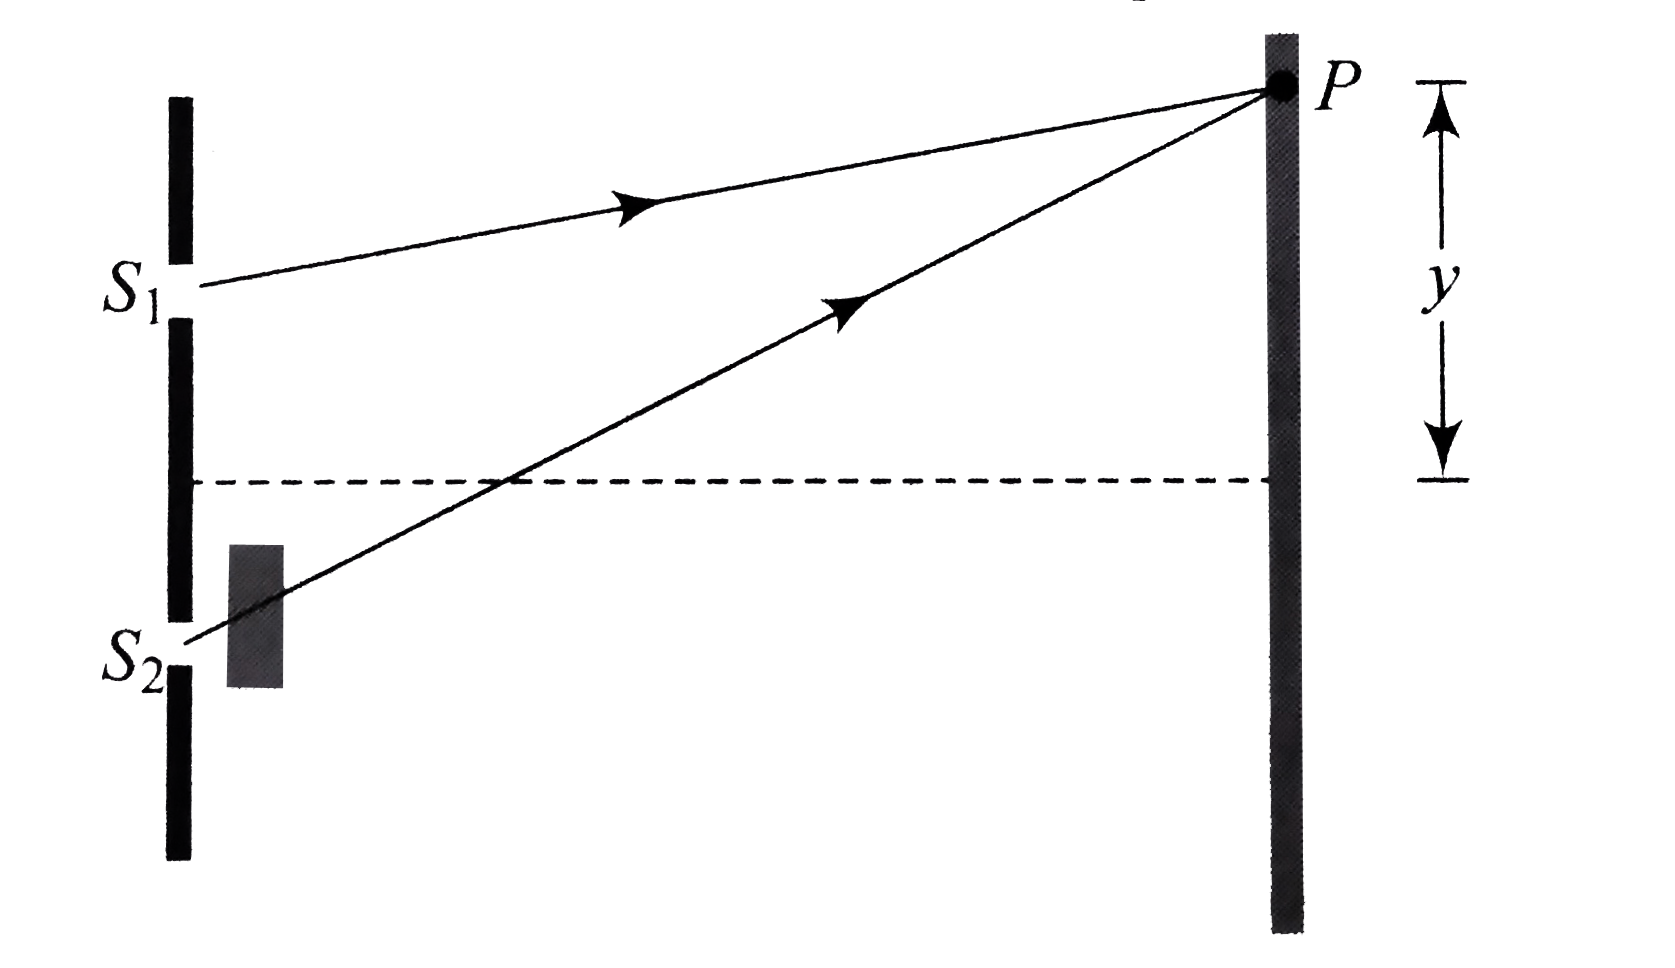 Young's double-slit experiment setup with ligth of wavelength lambda = 6000 Å, distance between two slit in 2 mm and distance between the plane of slits and the screen. Is 2 m. The slits are of equal intensity. When a sheet of glass of refractive index 1.5 (which permtis only a fraction eta of the incident light to pass through) and thickness 8000 Å is placed in front of the lower slit, it is observed that the intensity at a point P, 0.15 mm above the central maxima, does not change.      The value of eta is